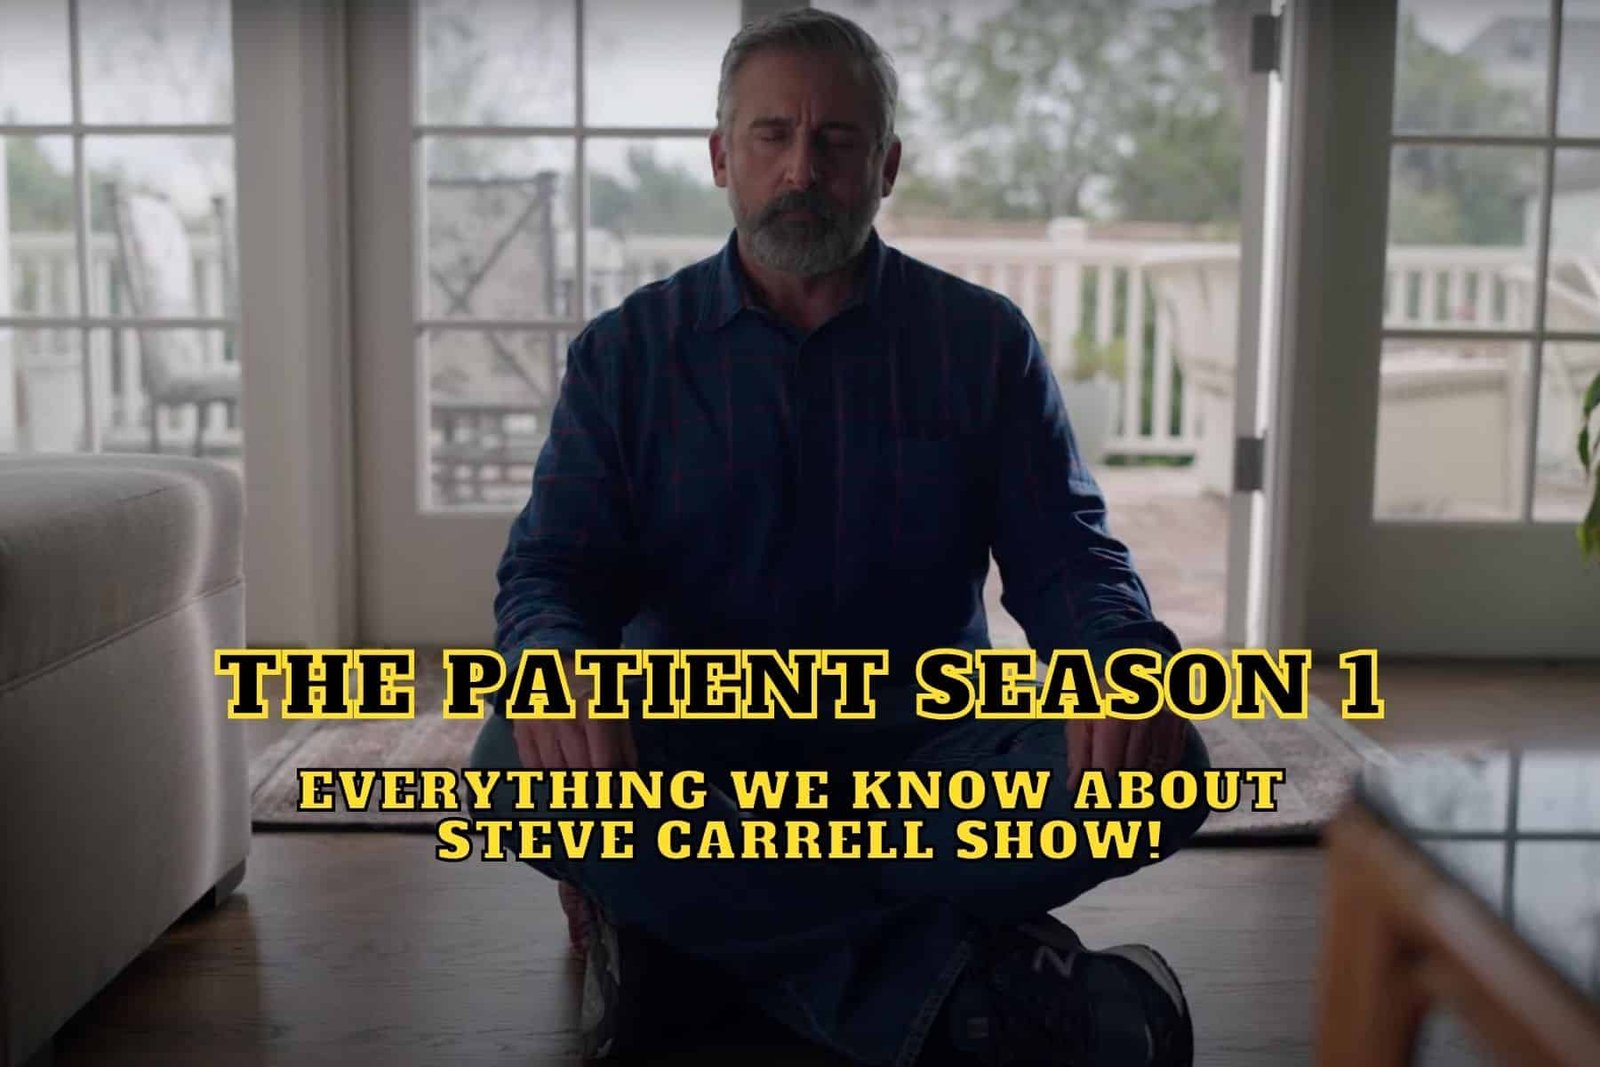 The Patient Season 1 - Everything We Know About Steve Carrell Show!